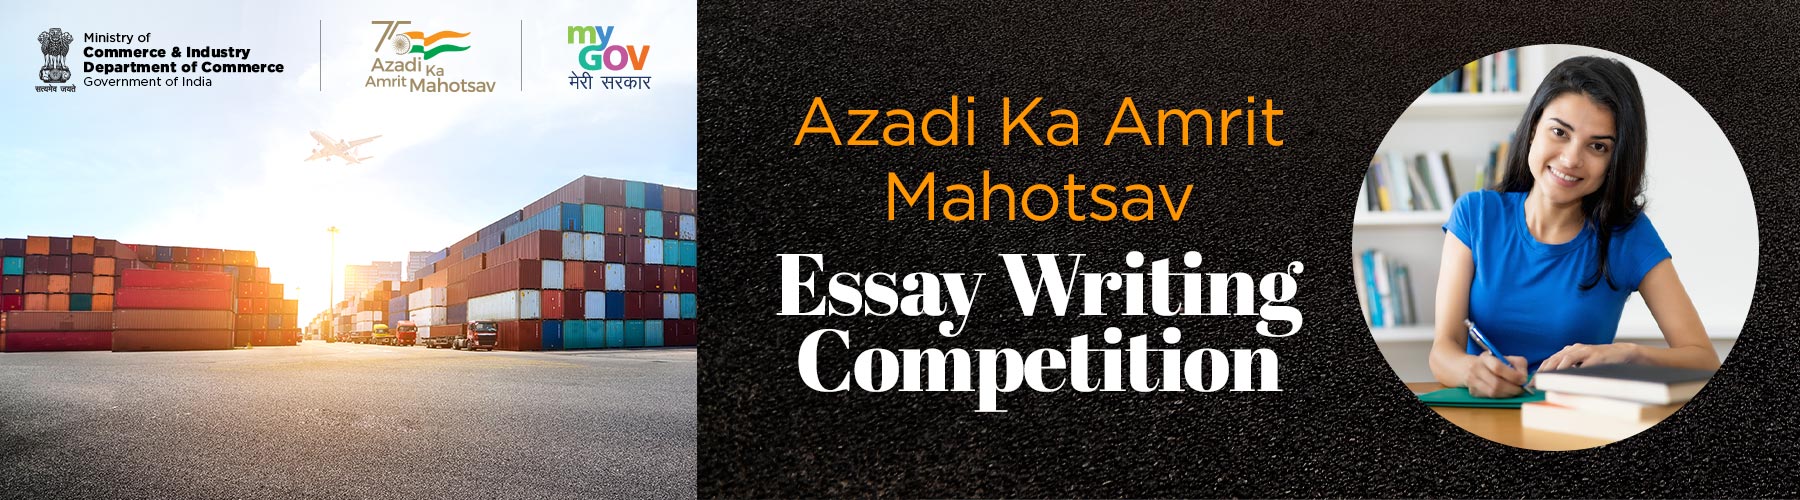 Online Essay Writing Competition